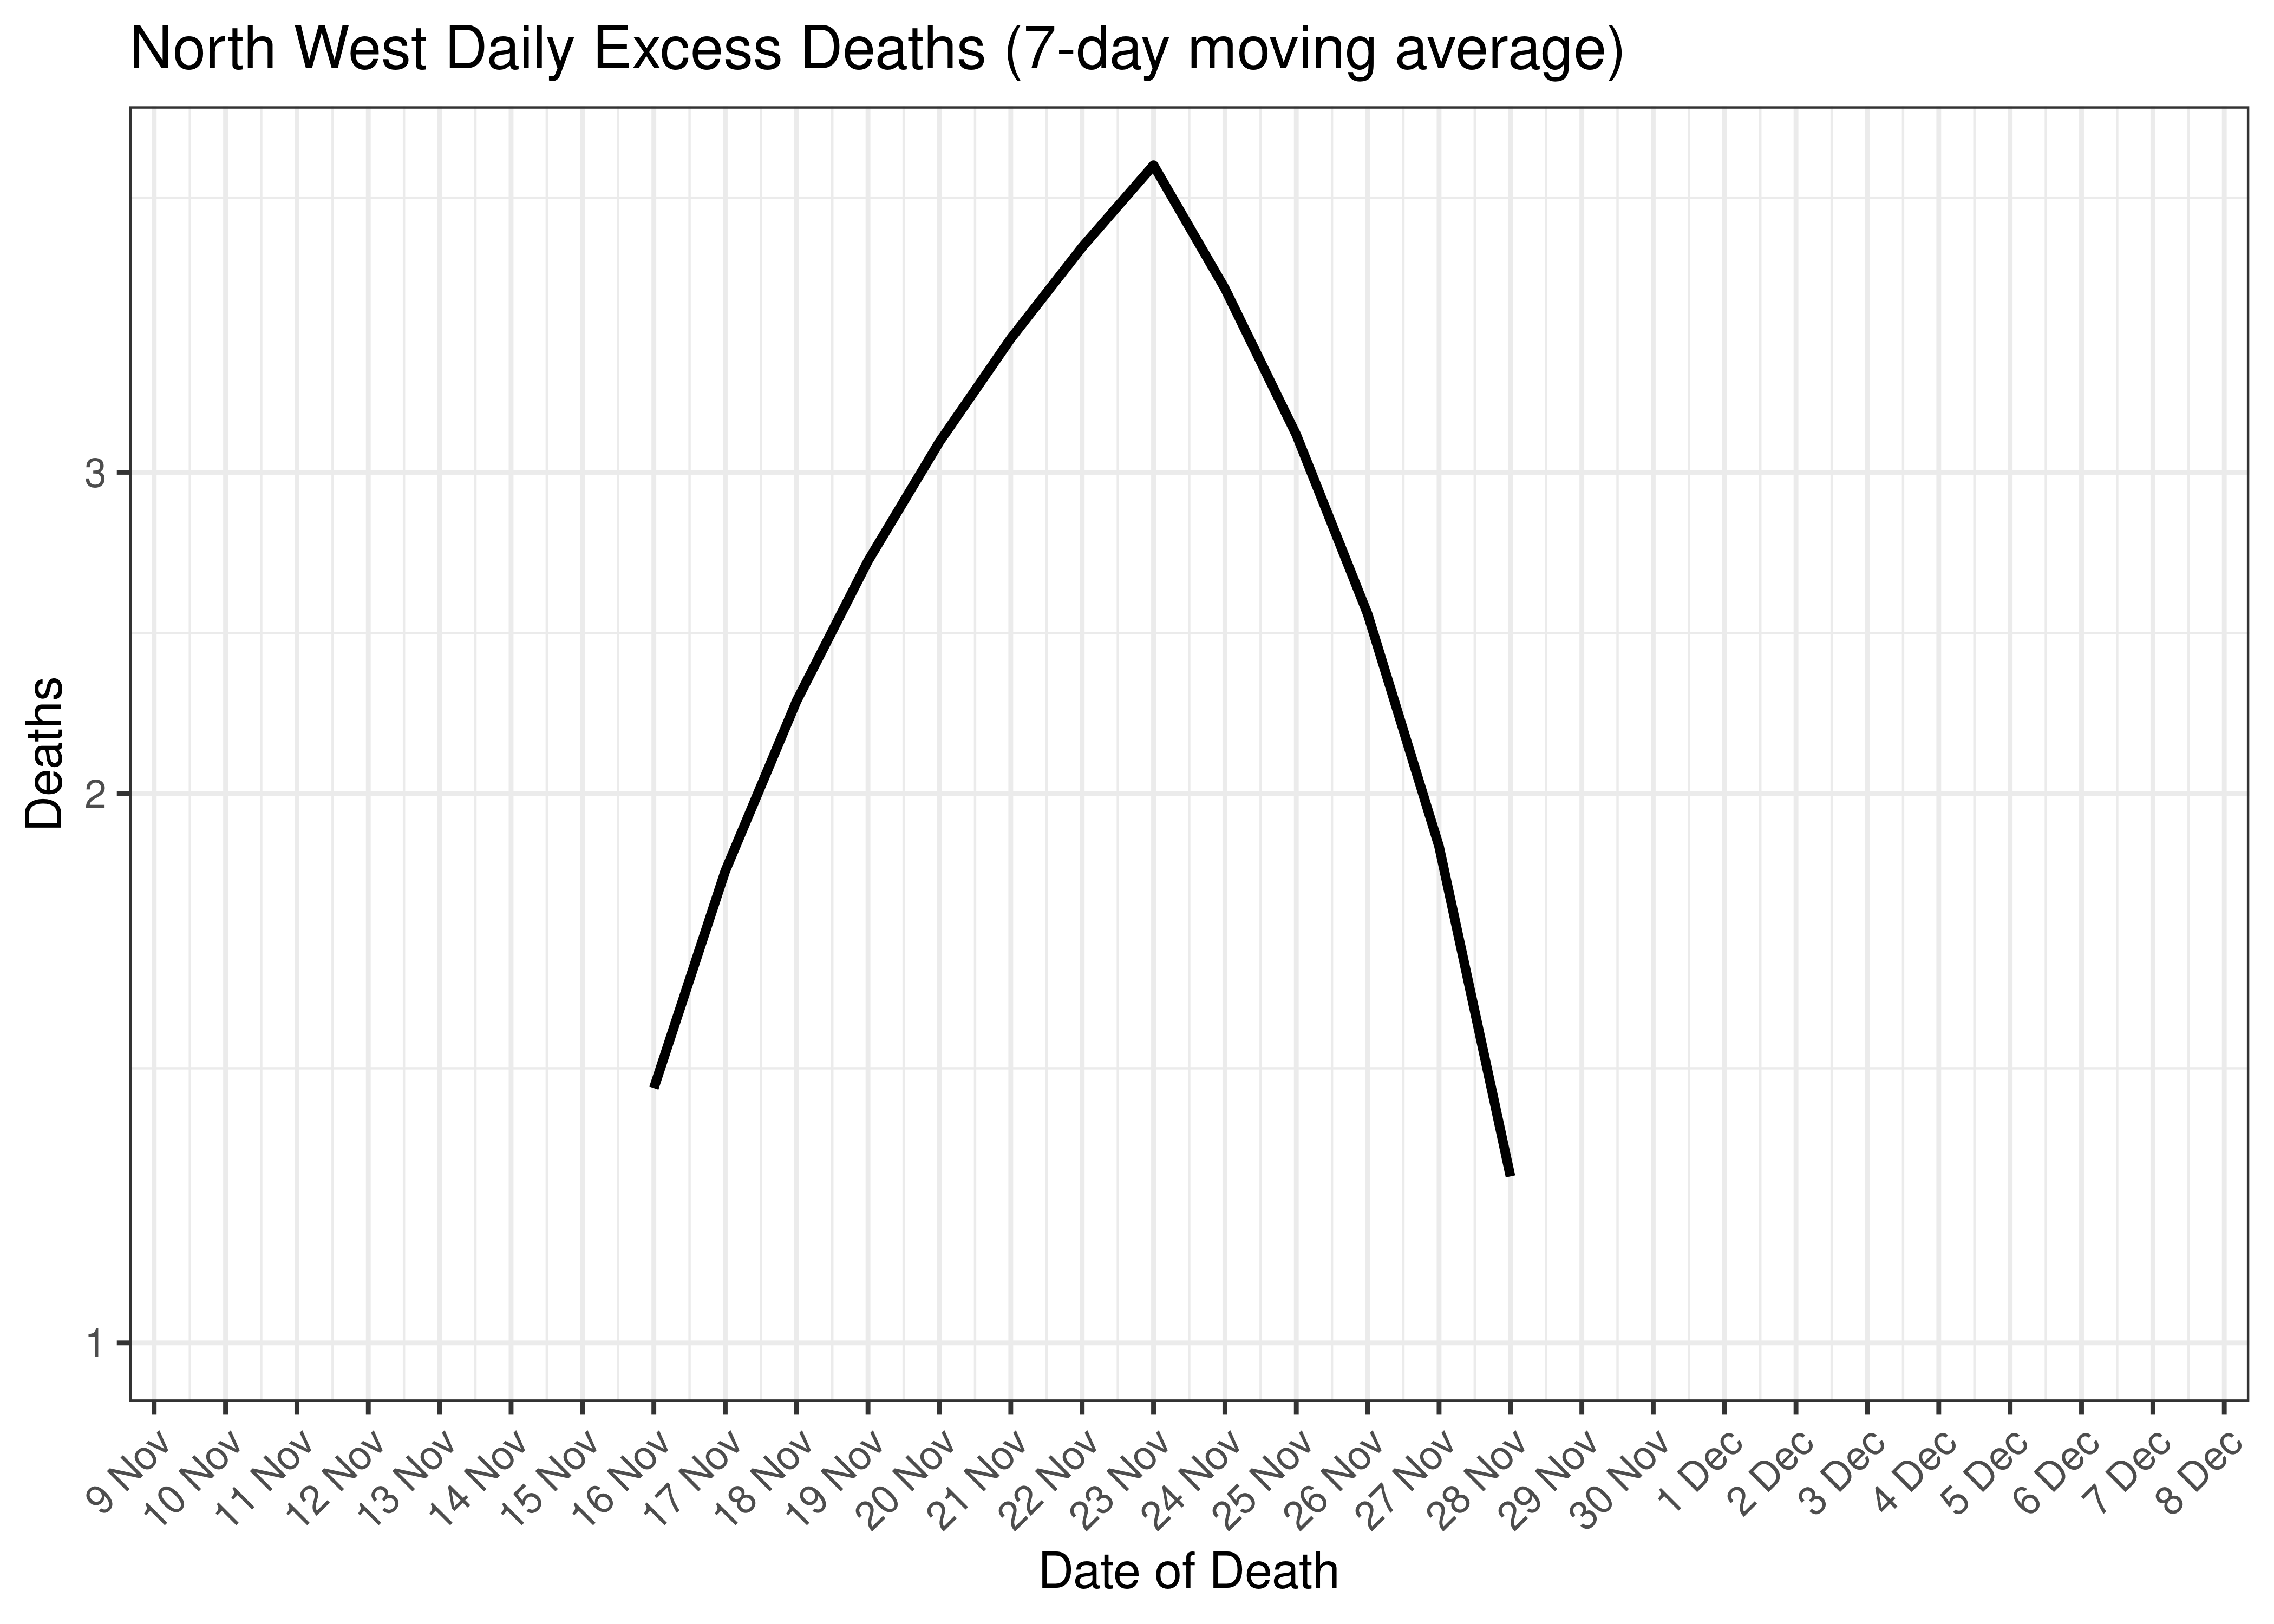 North West Daily Excess Deaths for Last 30-days (7-day moving average)